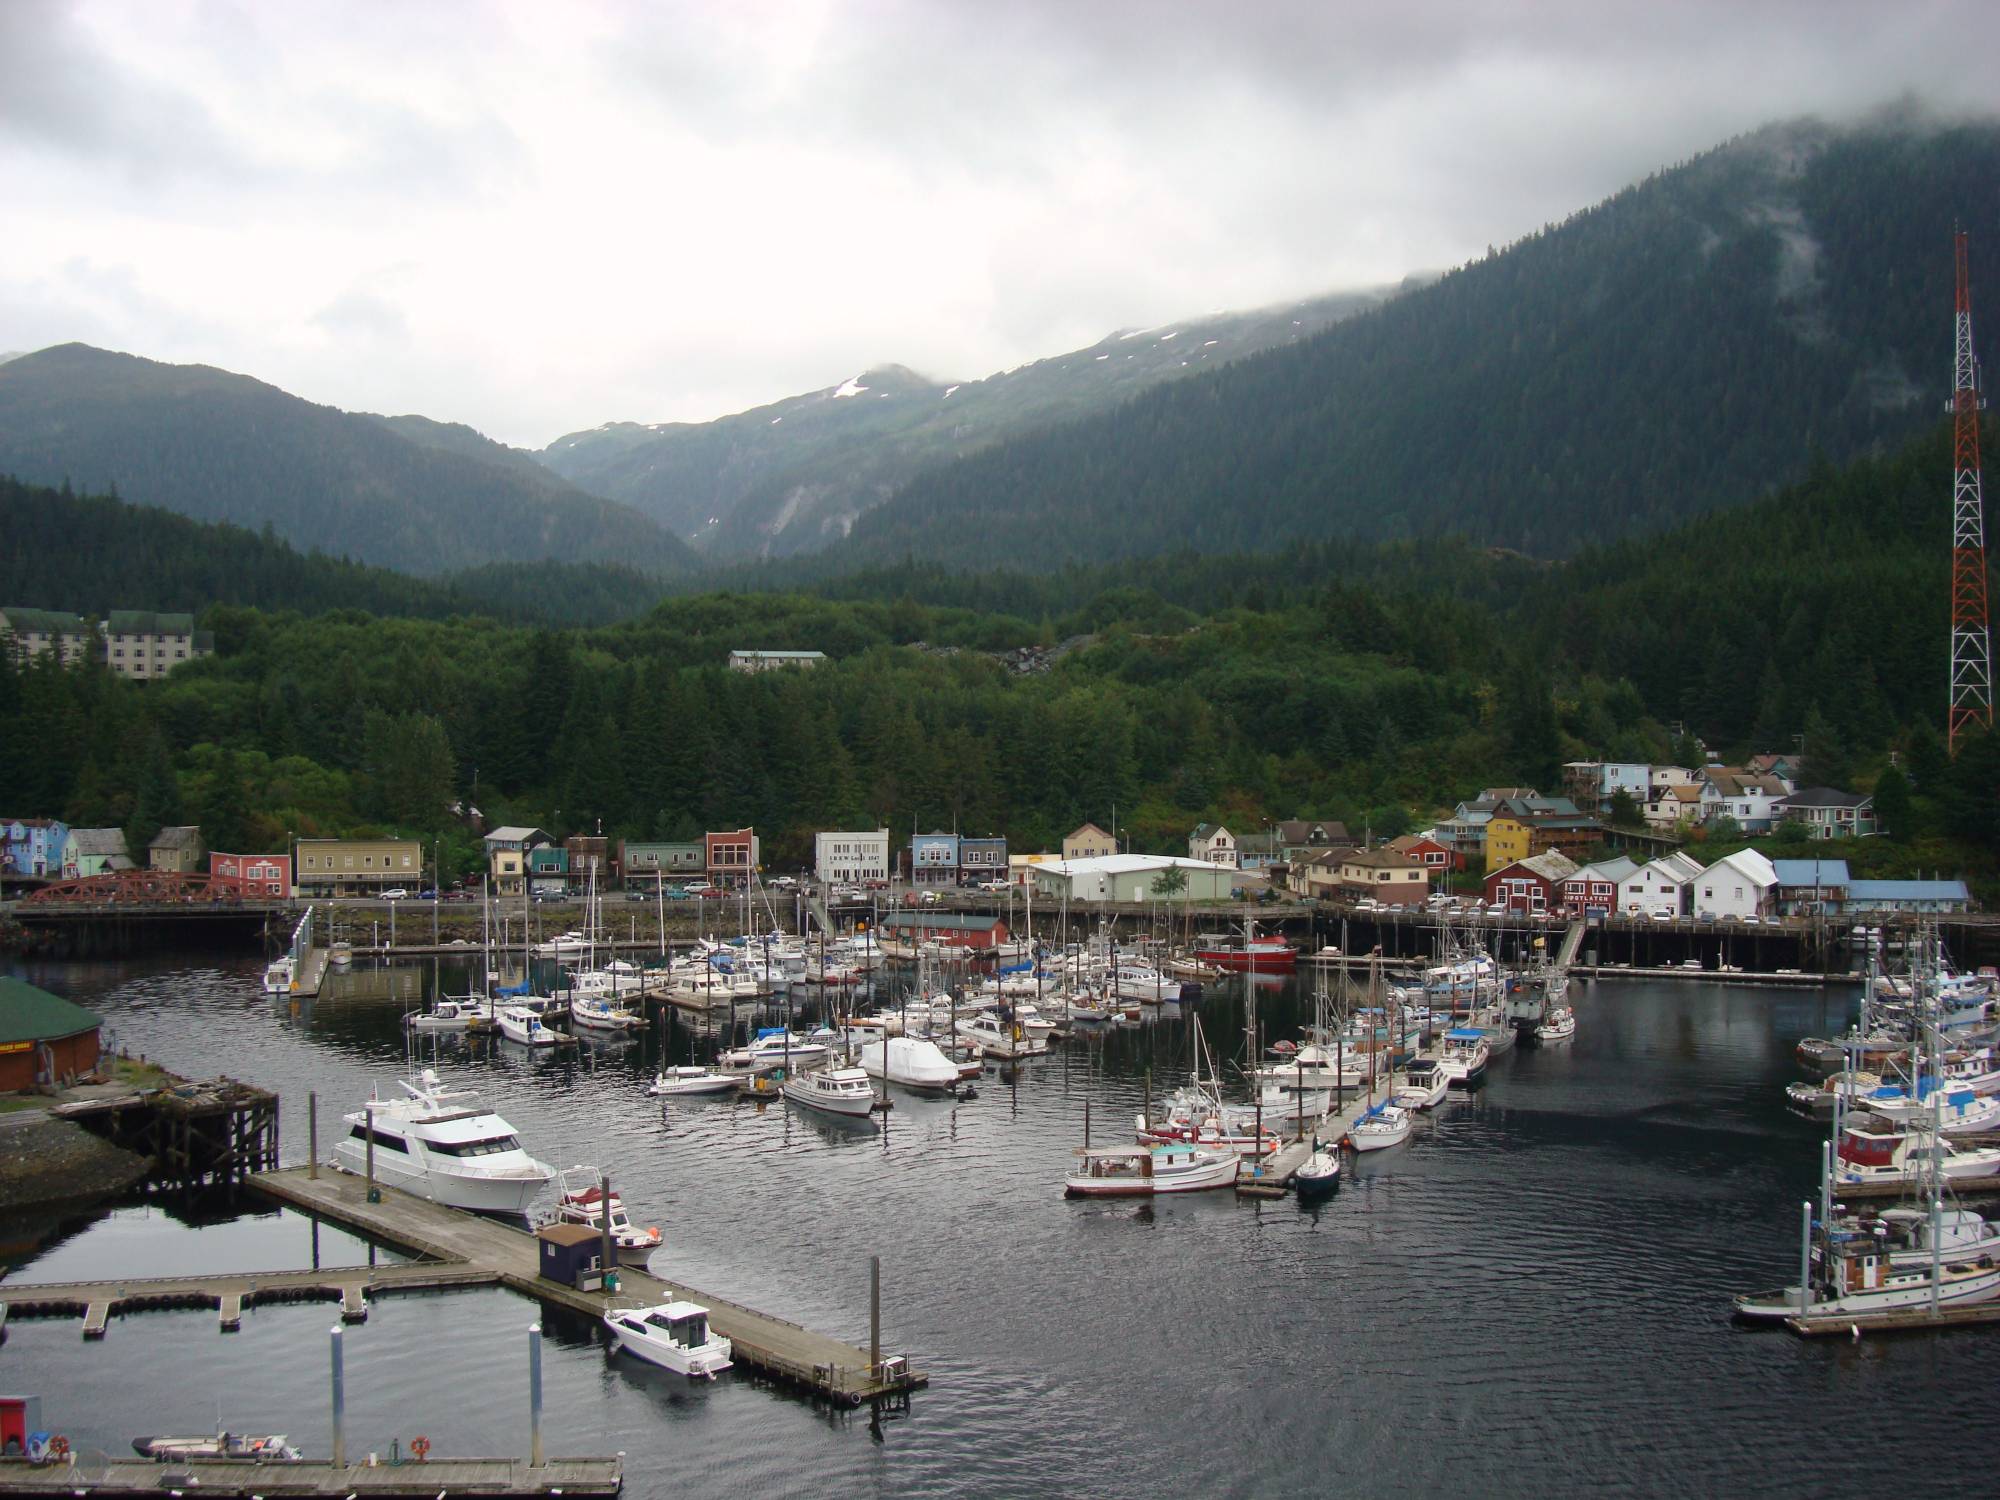 Ketchikan - from the Wonder